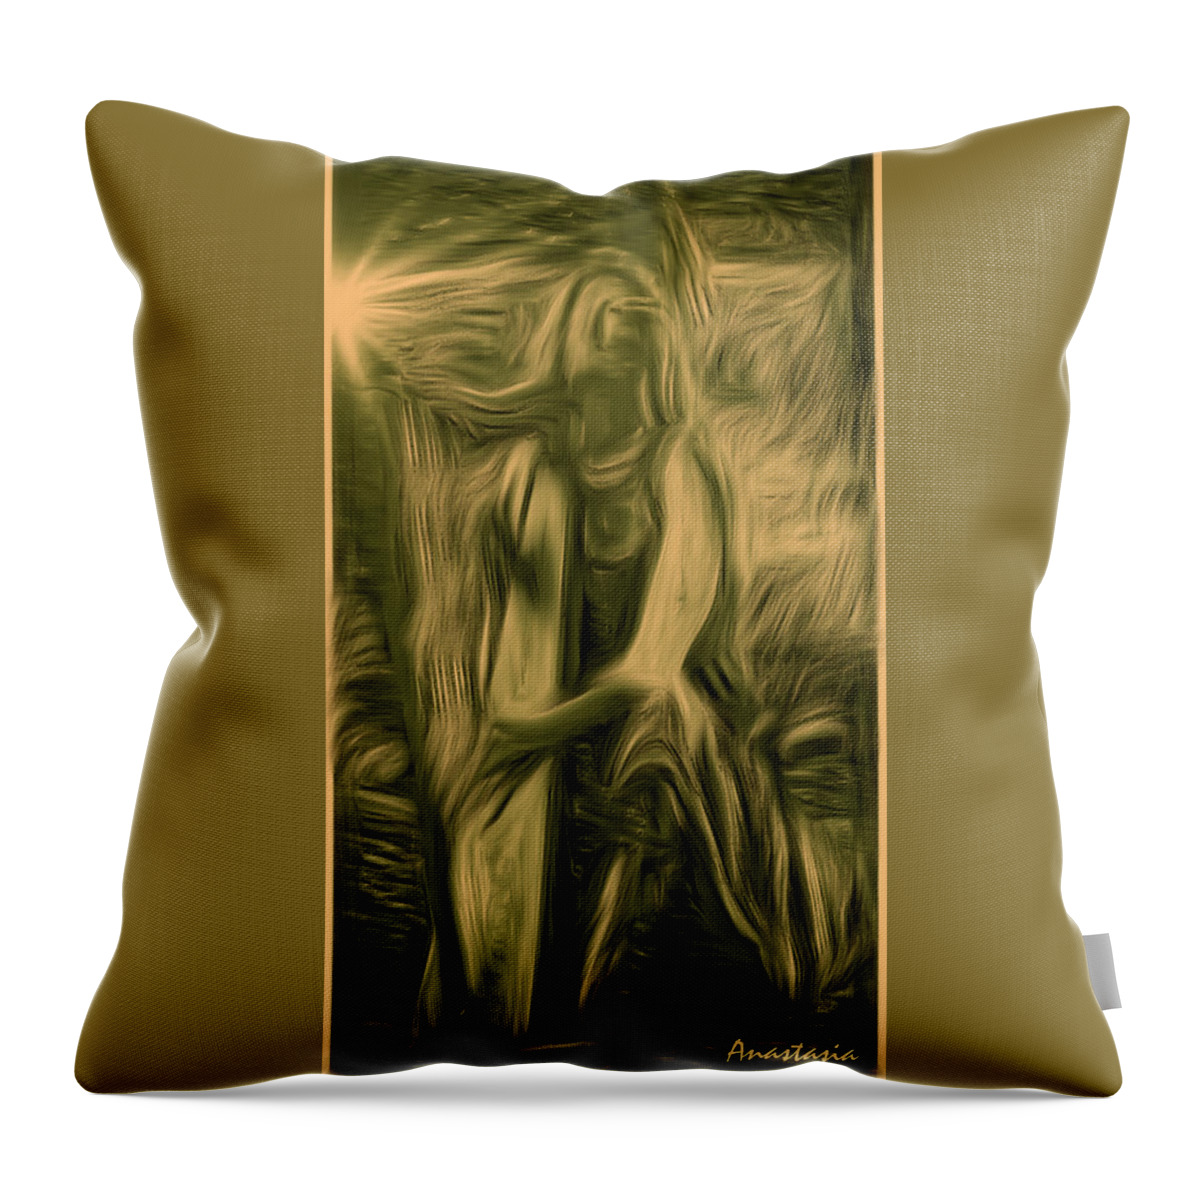 Harpist Throw Pillow featuring the photograph Praise Him With The Harp I by Anastasia Savage Ealy